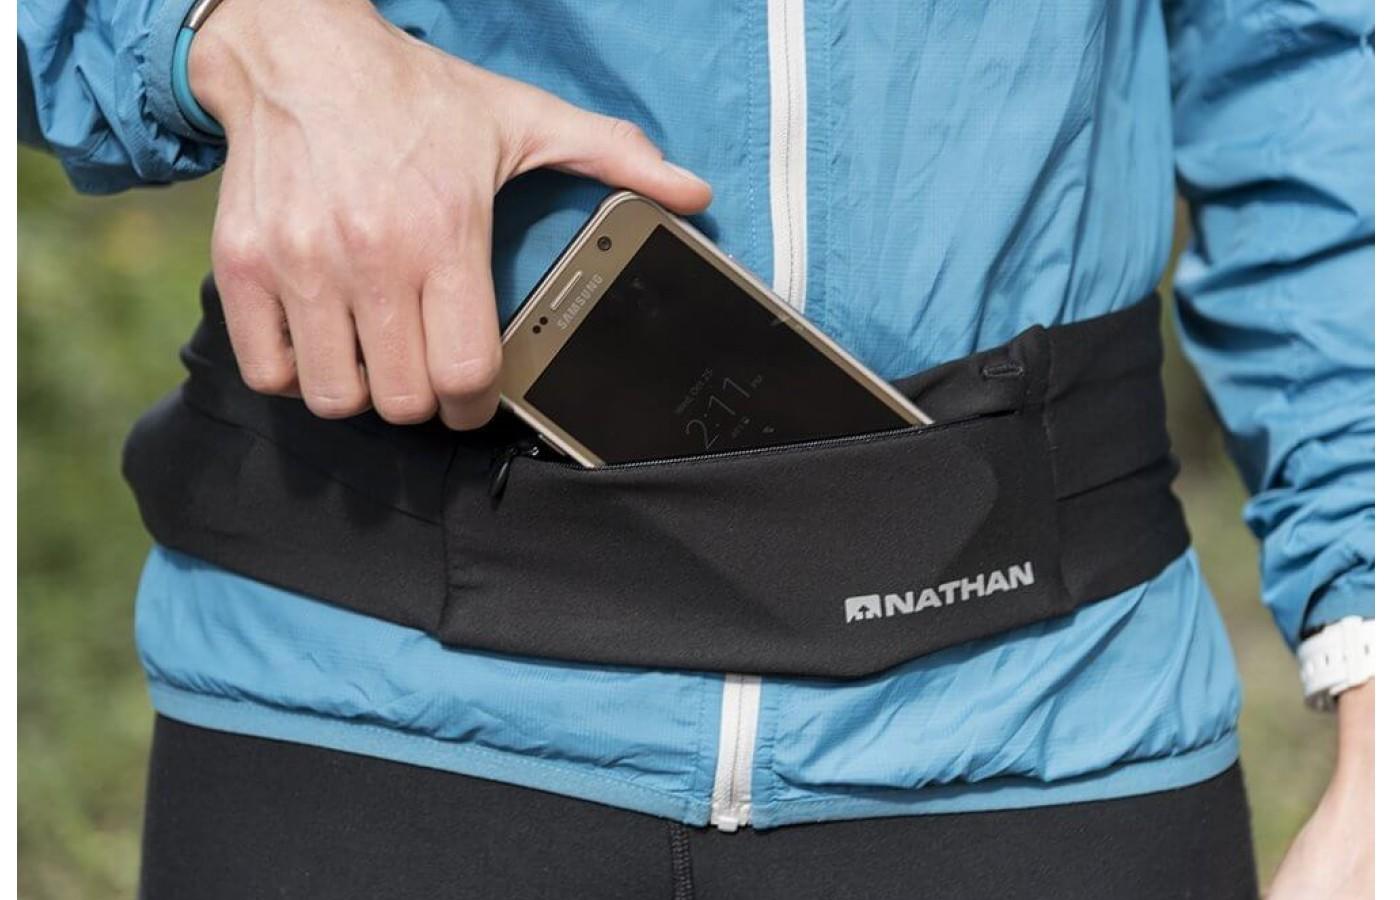 The Nathan Zipster Belt can fit up to an iPhone 7 Plus